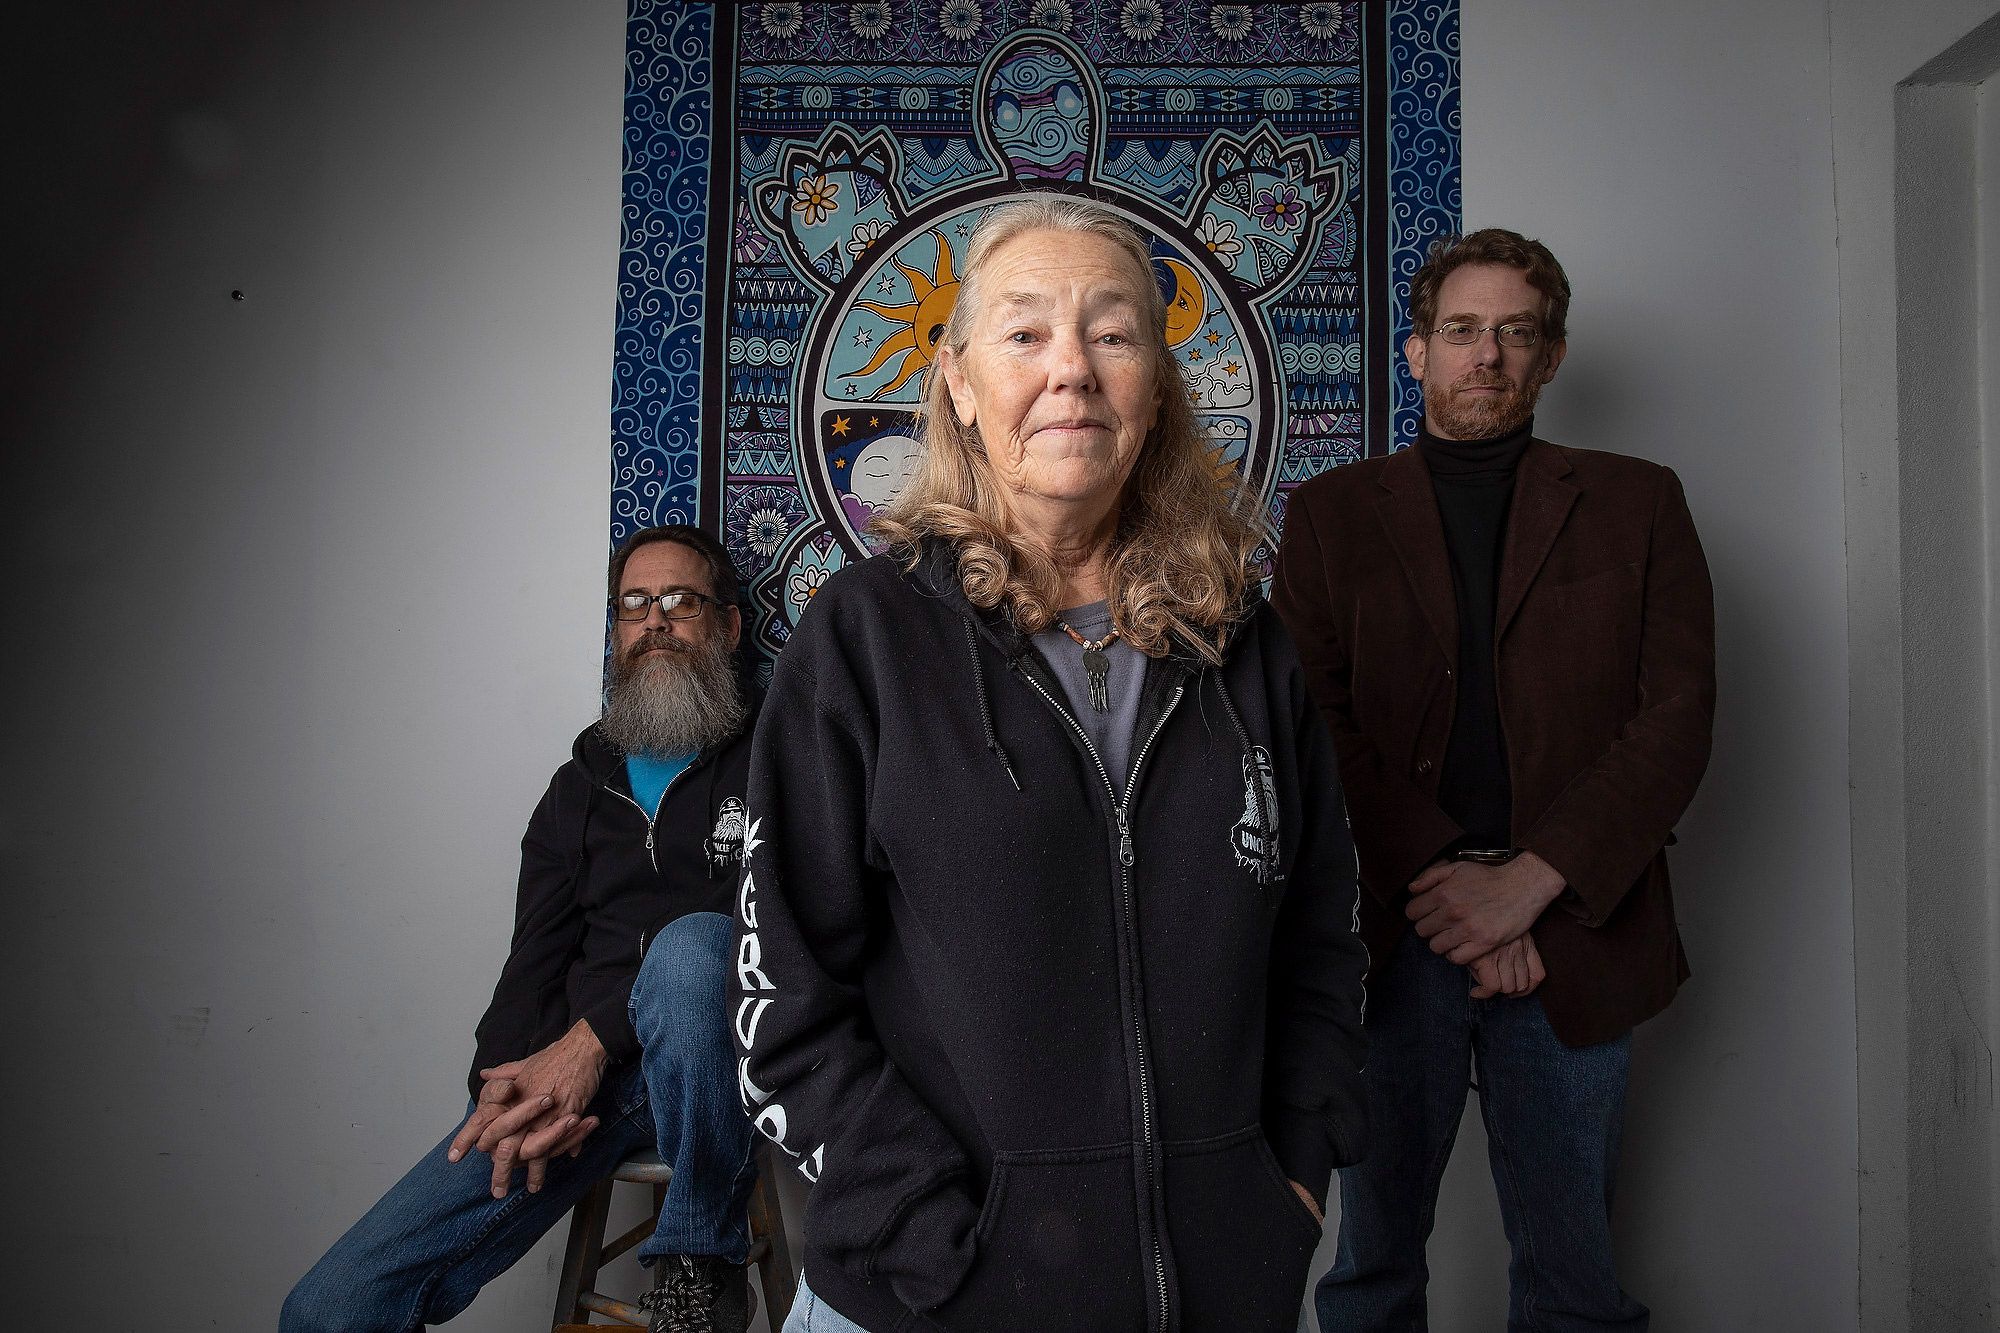 Left to right: Chris Moe (a.k.a. “Uncle Grumpy”), Norma Sapp, and Lawrence Pasternack formed an advocacy group called the Oklahoma Cannibus Liberty Alliance. 